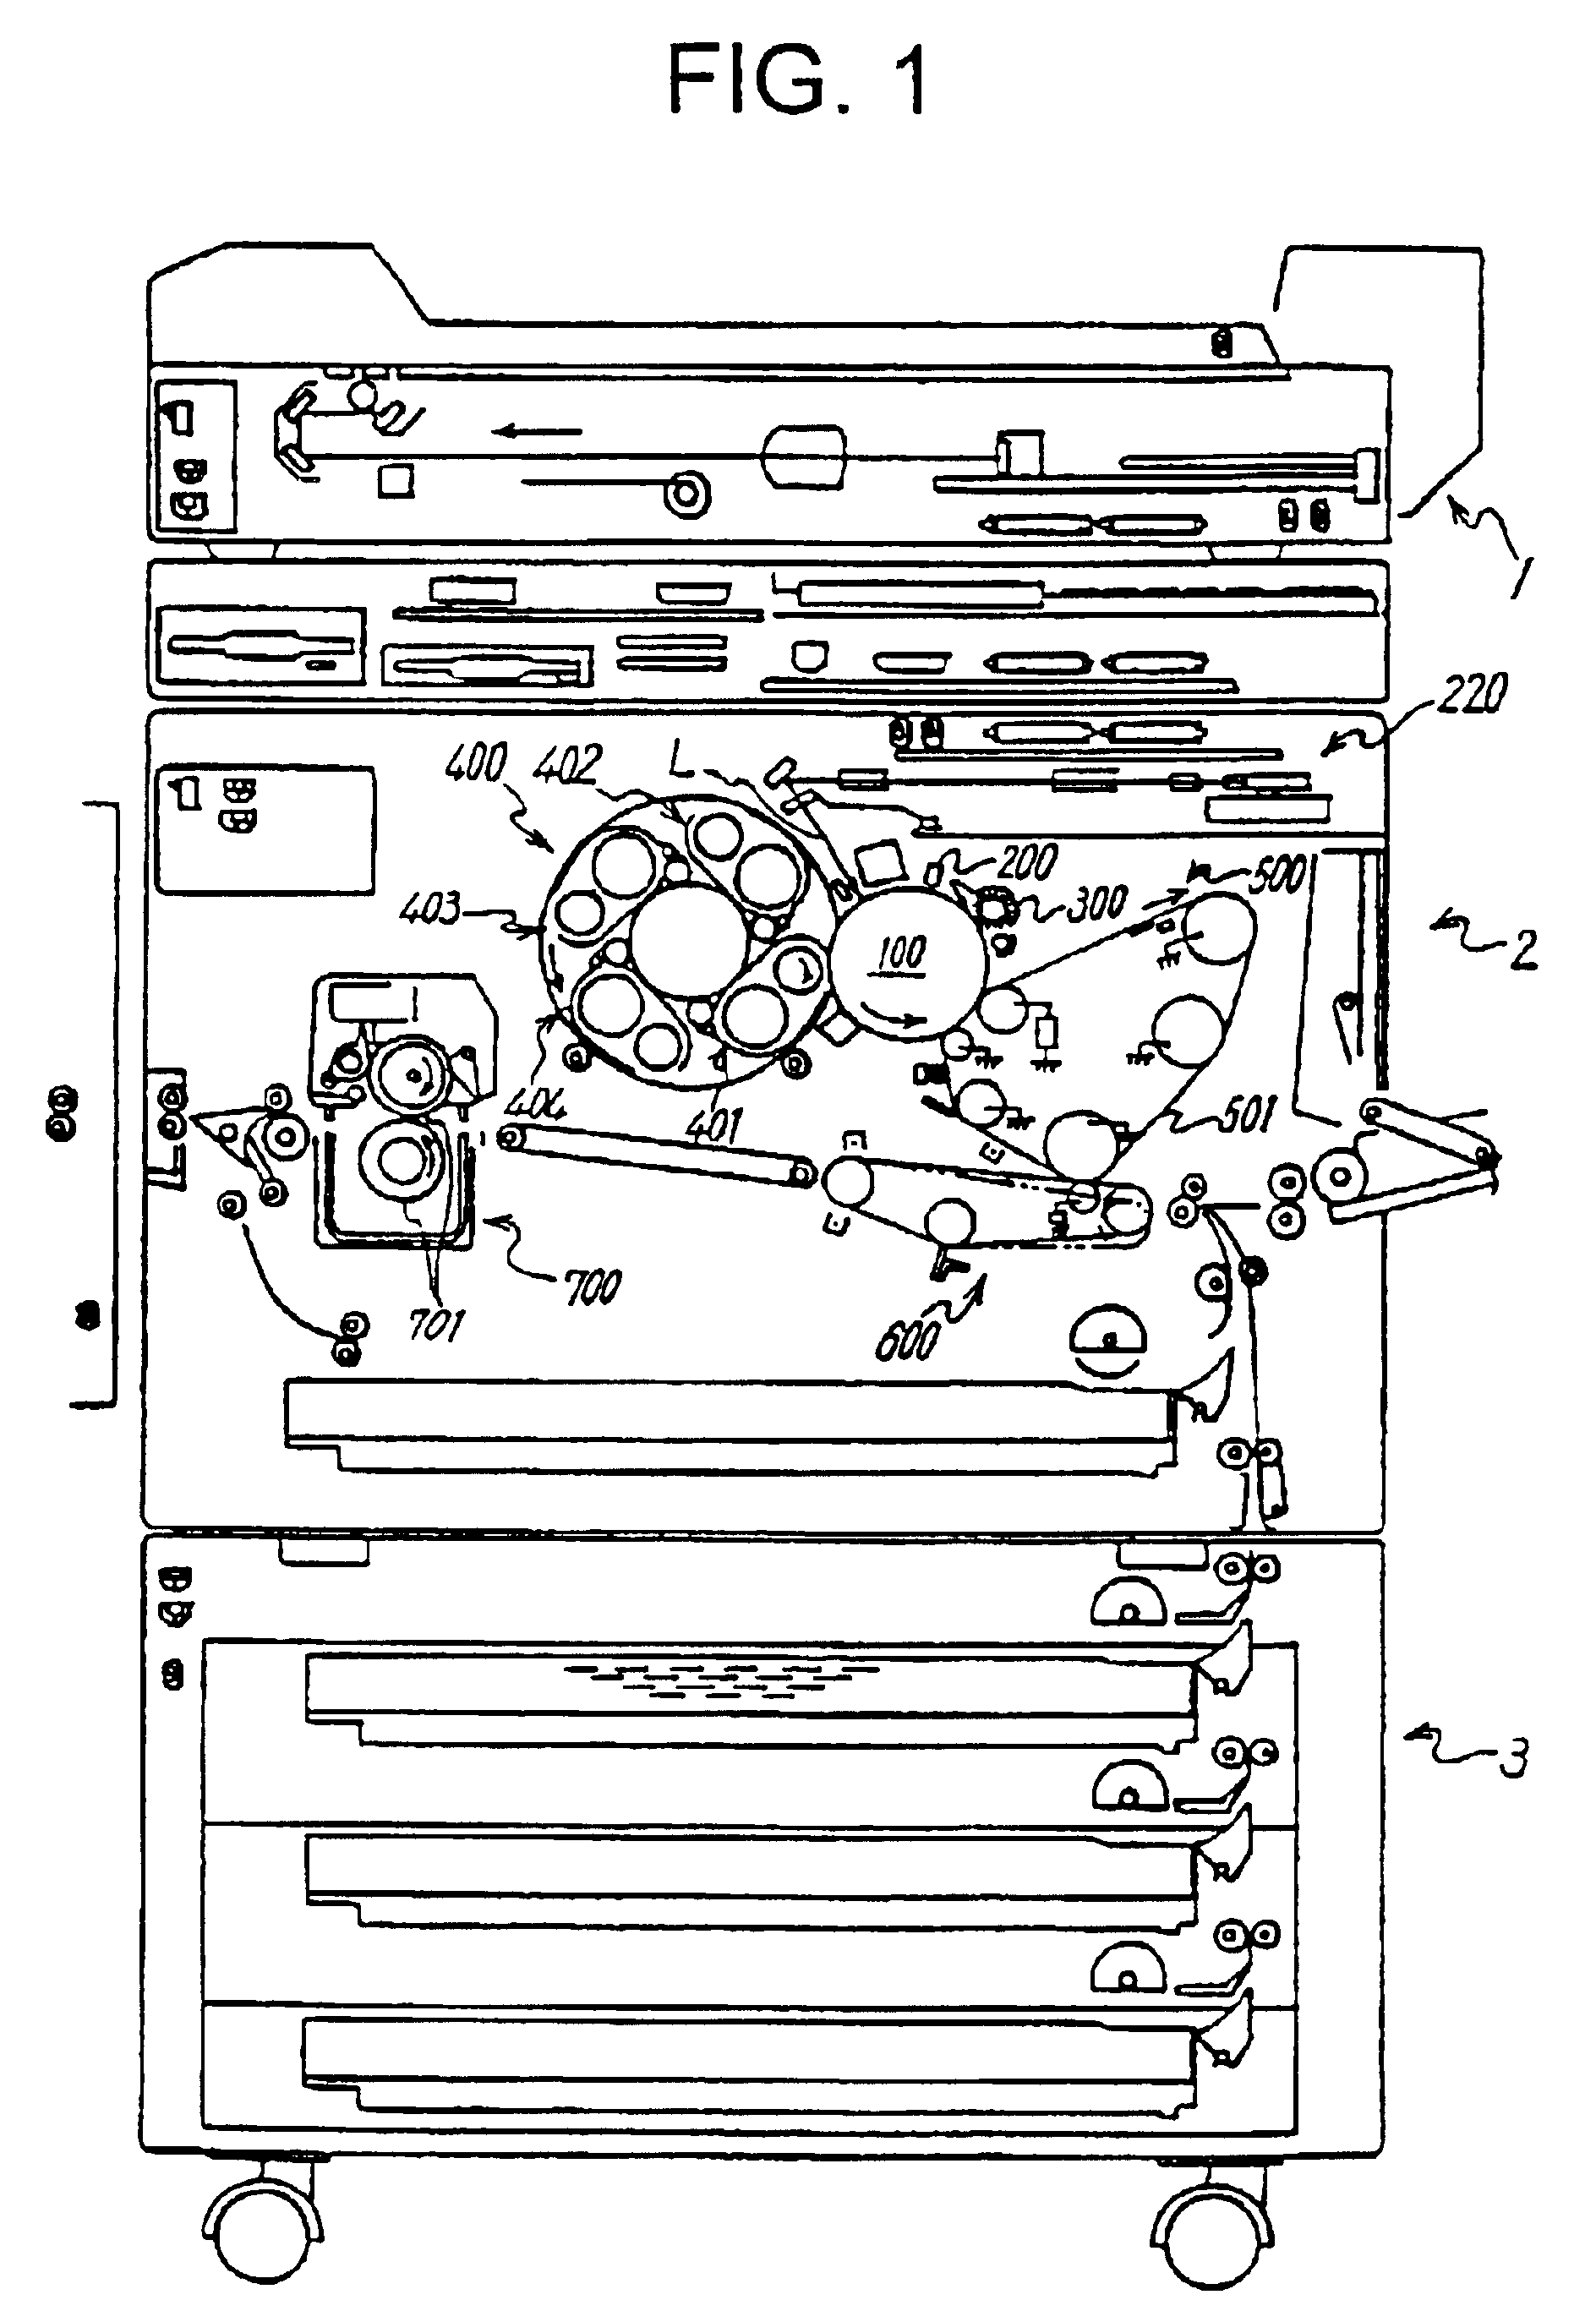 Image formation apparatus and a method of controlling the image formation apparatus